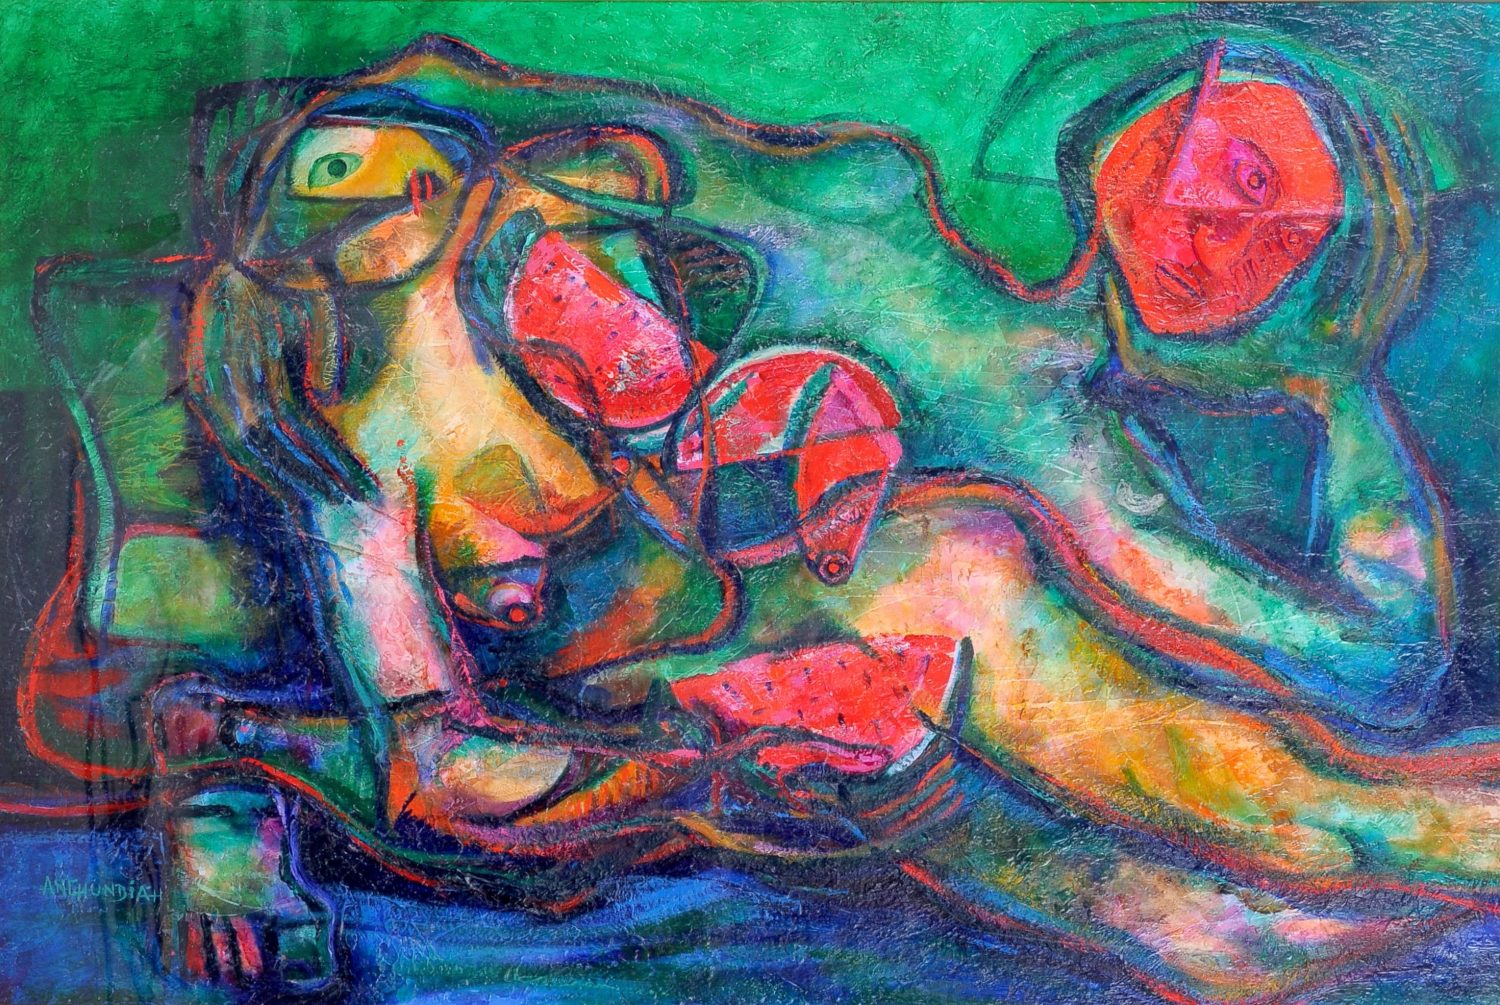 thumbnail of Untitled work by Ecuadorian artist Hector Anchundia. medium: oil on canvas. Dimensions: 26.7 x 39 inches. date: 1995